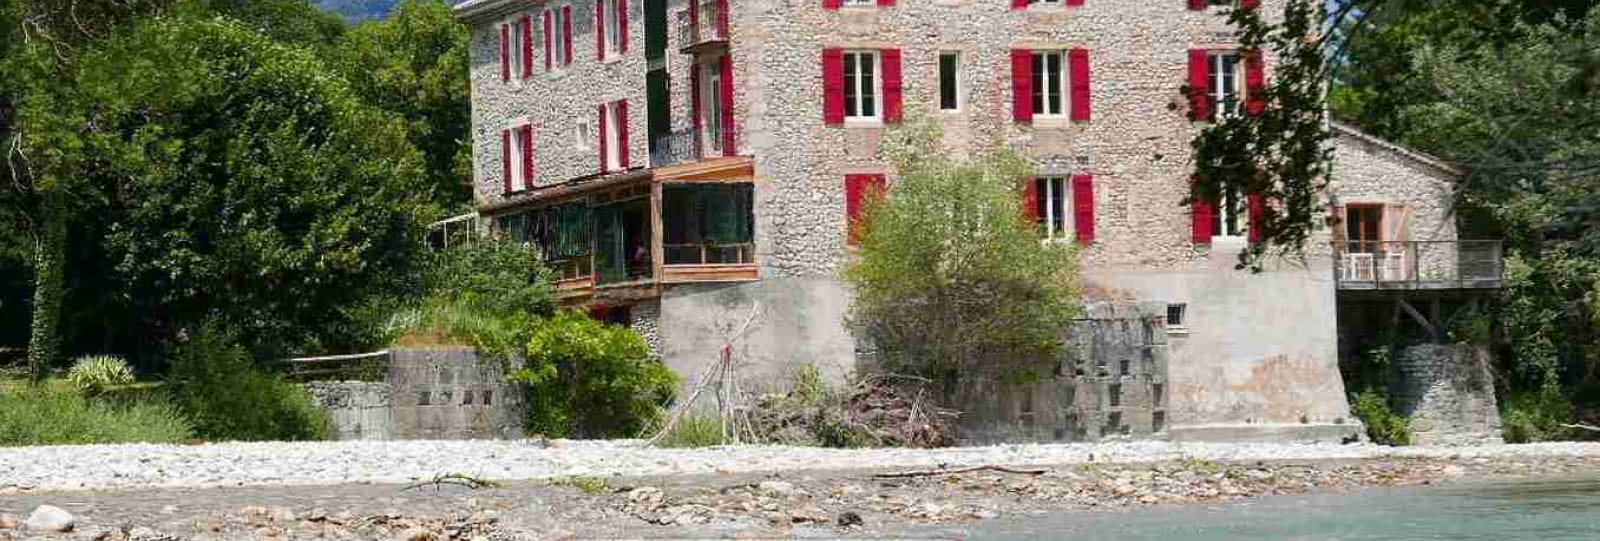 Le Moulin de Solaure Bed and Breakfast